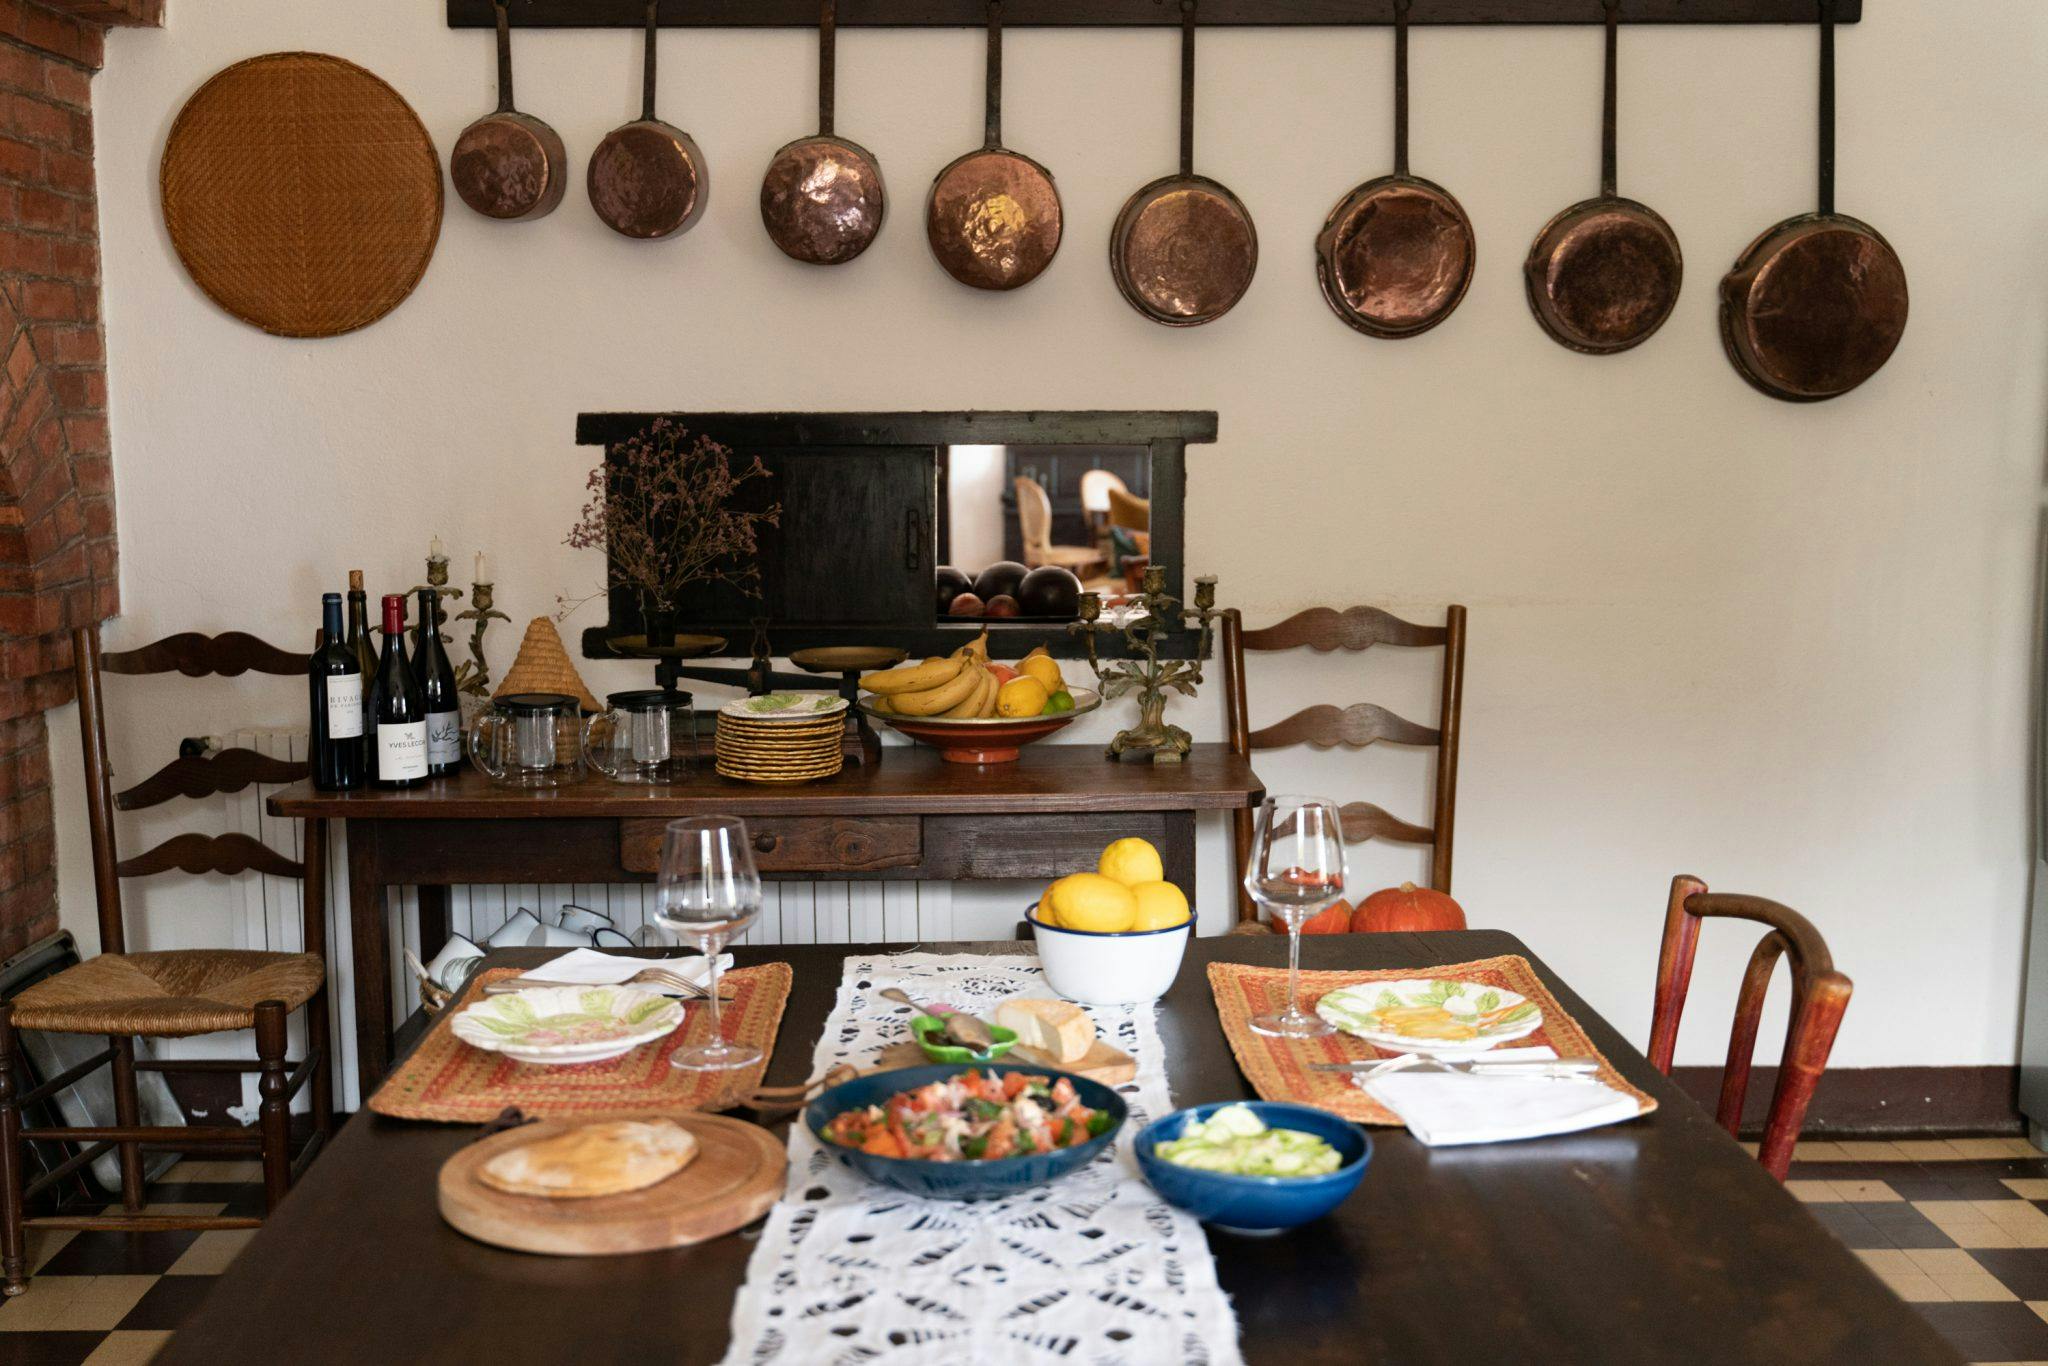 Kitchen: hanging copper pots and pans, wooden table garnished with delicacies